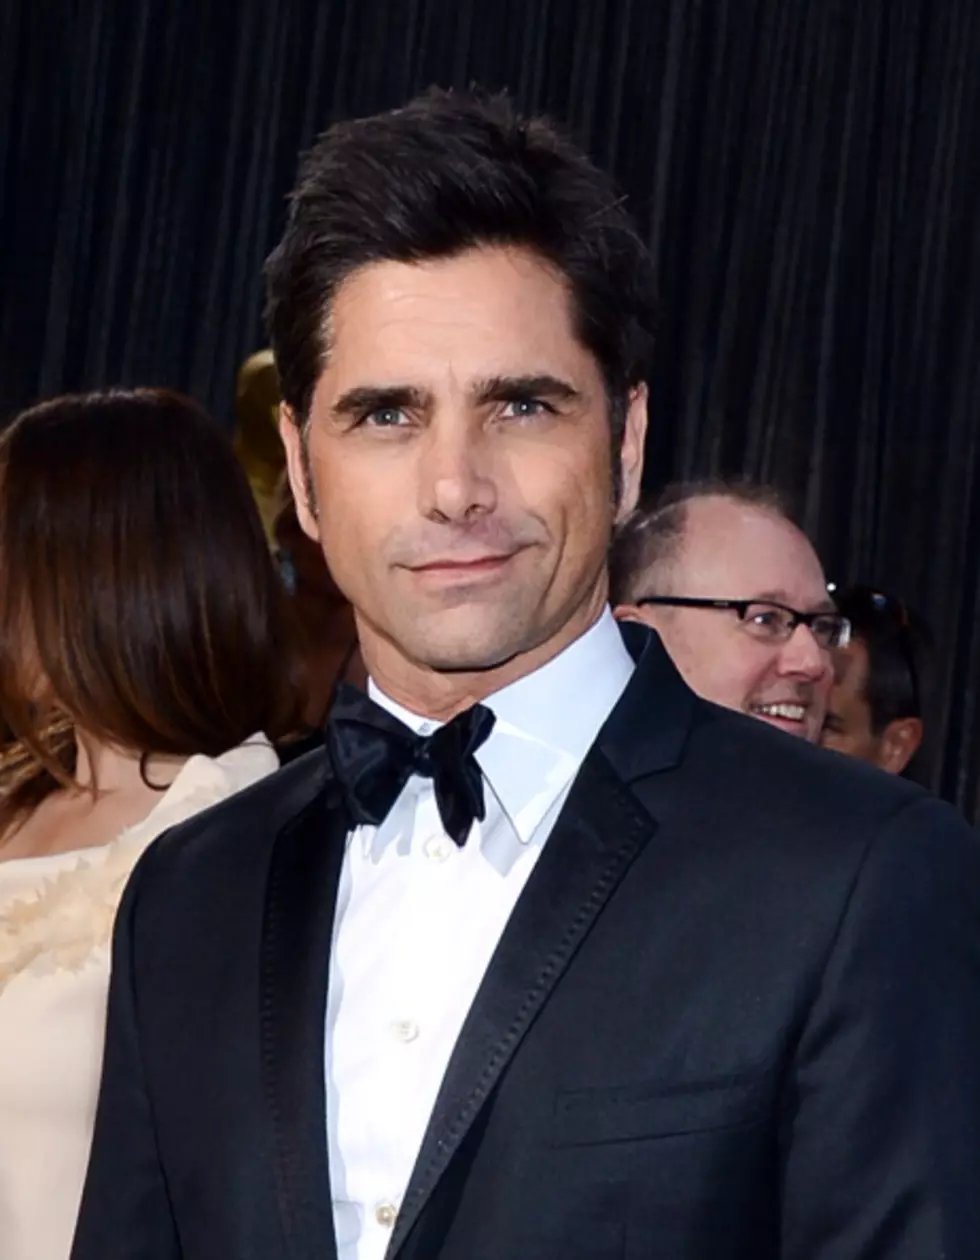 John Stamos to Reunite with Jesse and the Rippers